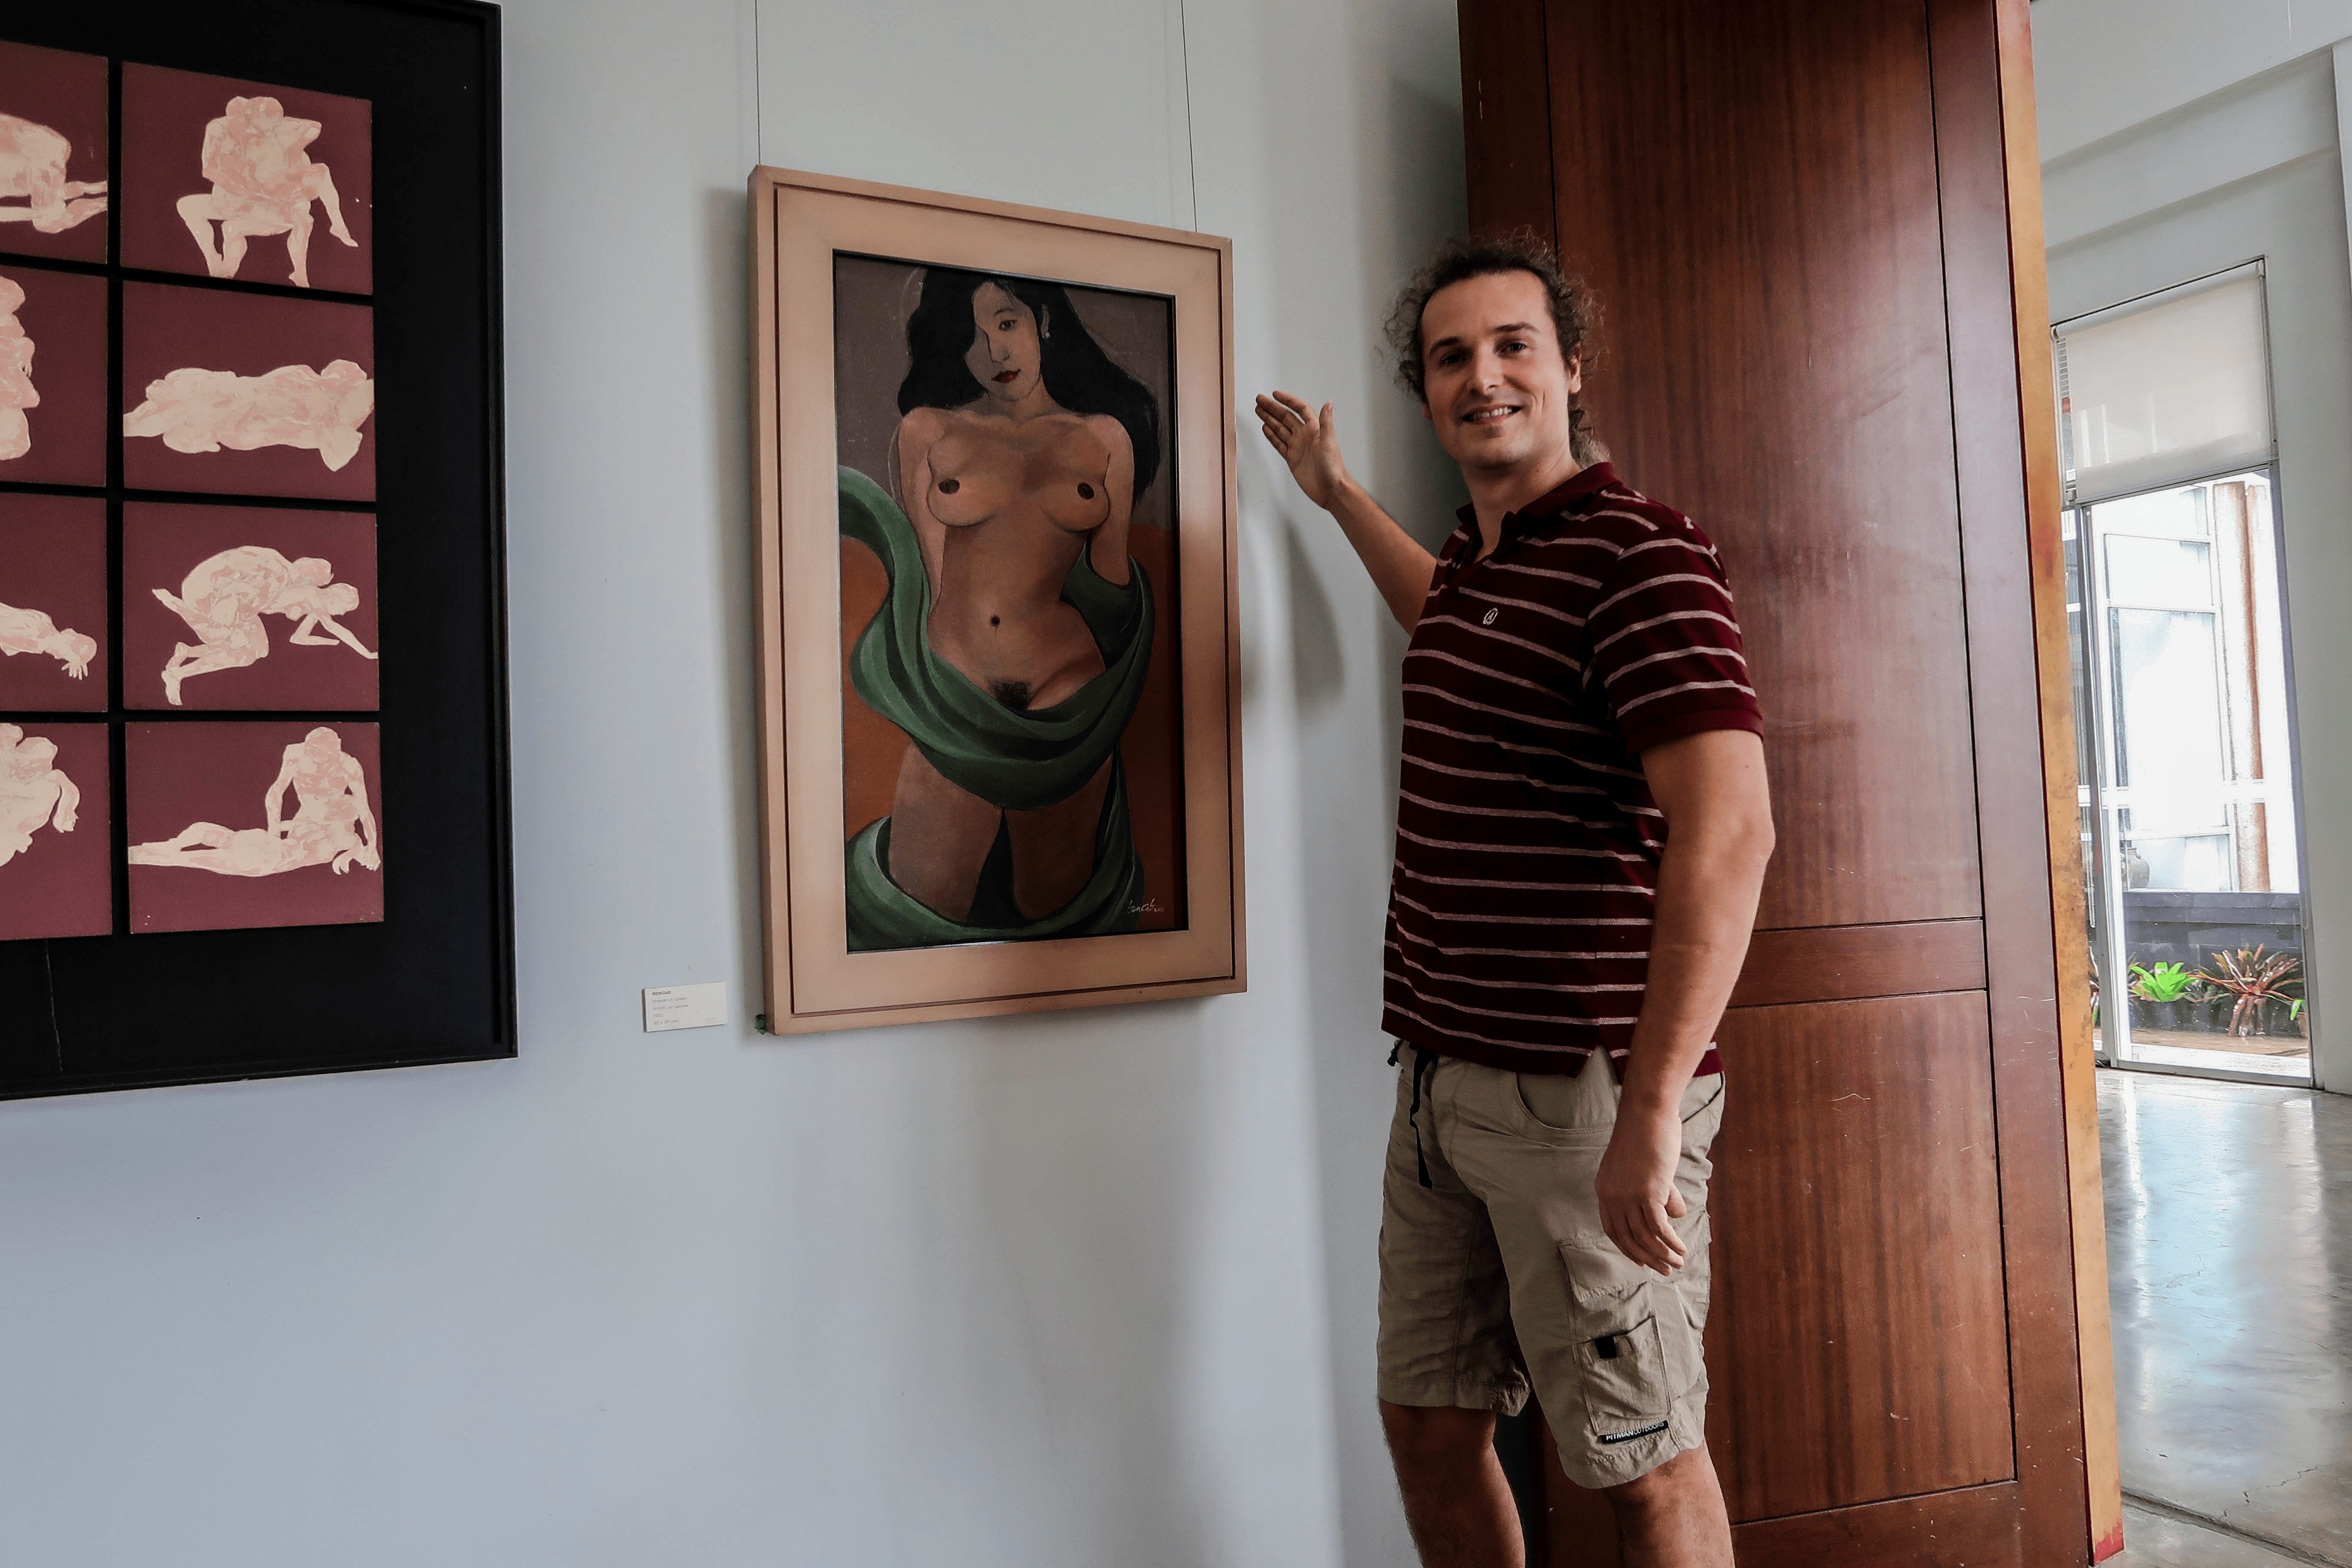 Lennythroughparadise in the bencab museum baguio city philippines at the erotica room, smiling at a painting of a naked filipina woman